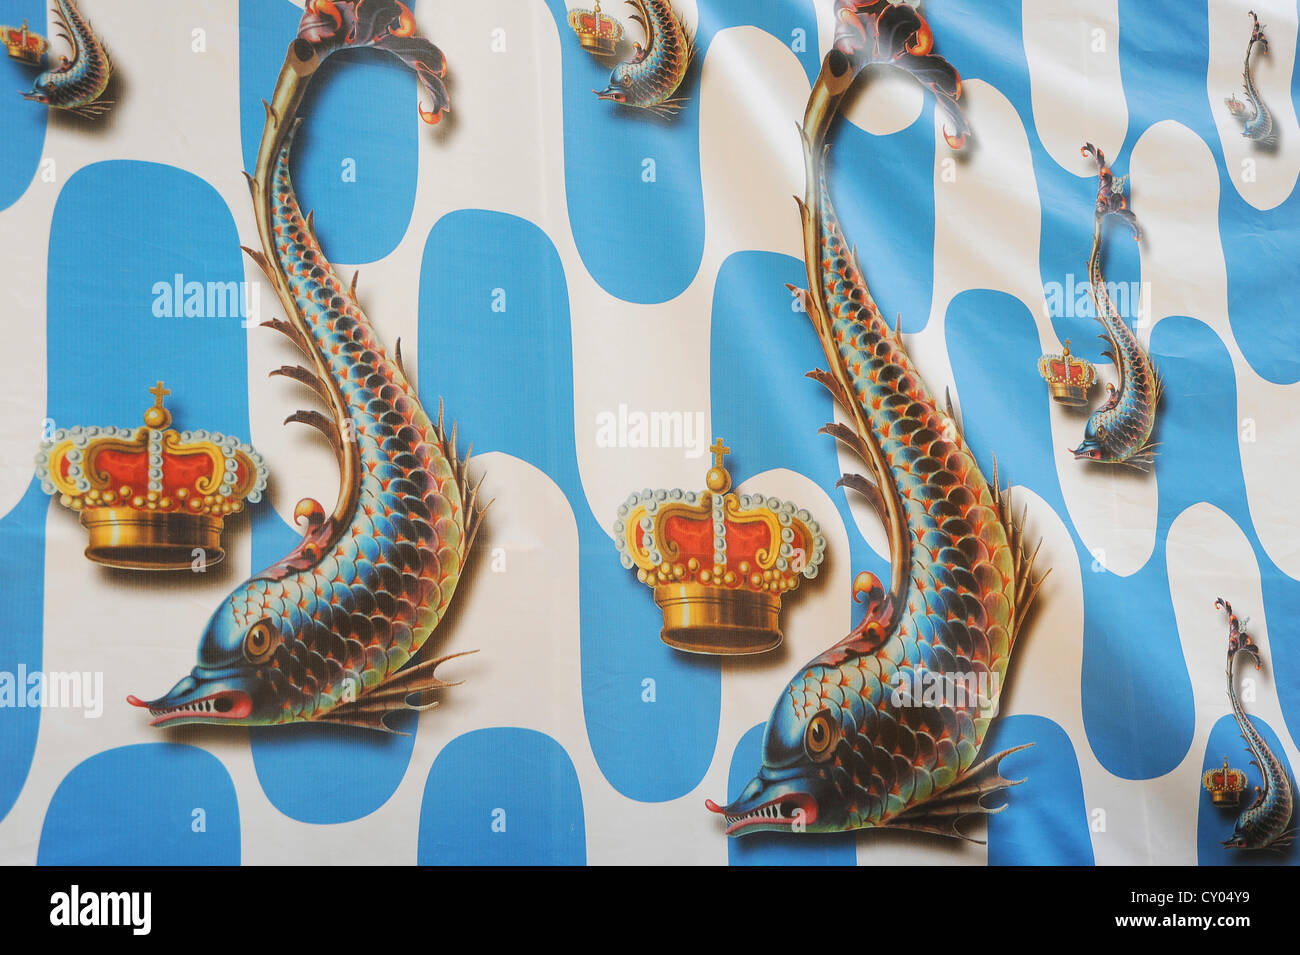 Images of fish, Contrada district, Siena, Tuscany, Italy, Europe Stock Photo